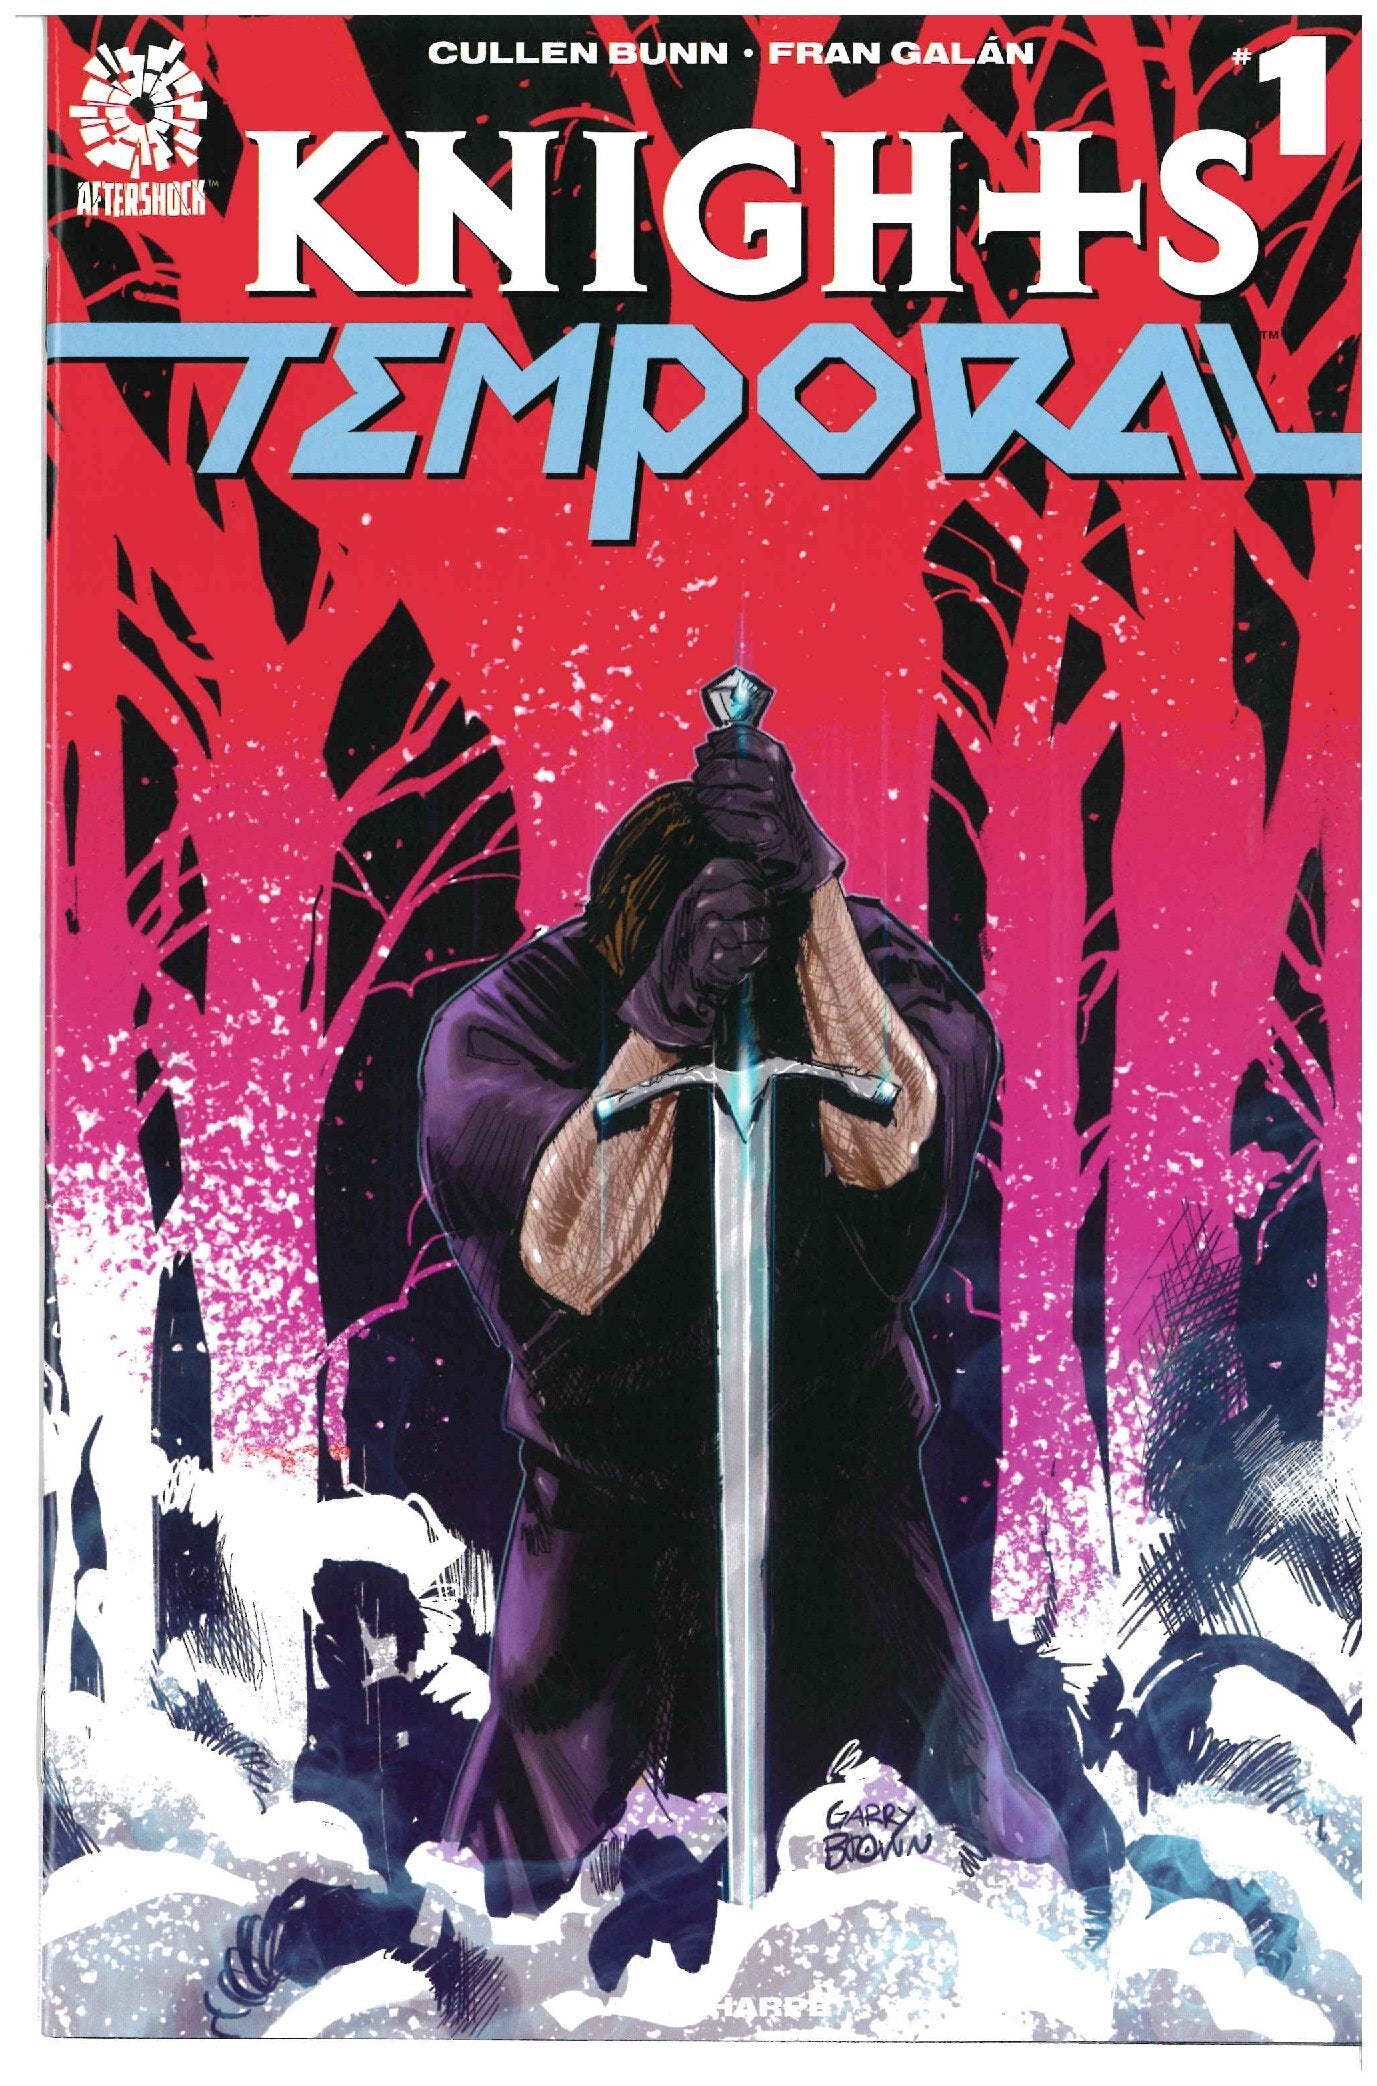 Knight Temporal #1 Garry Brown Variant